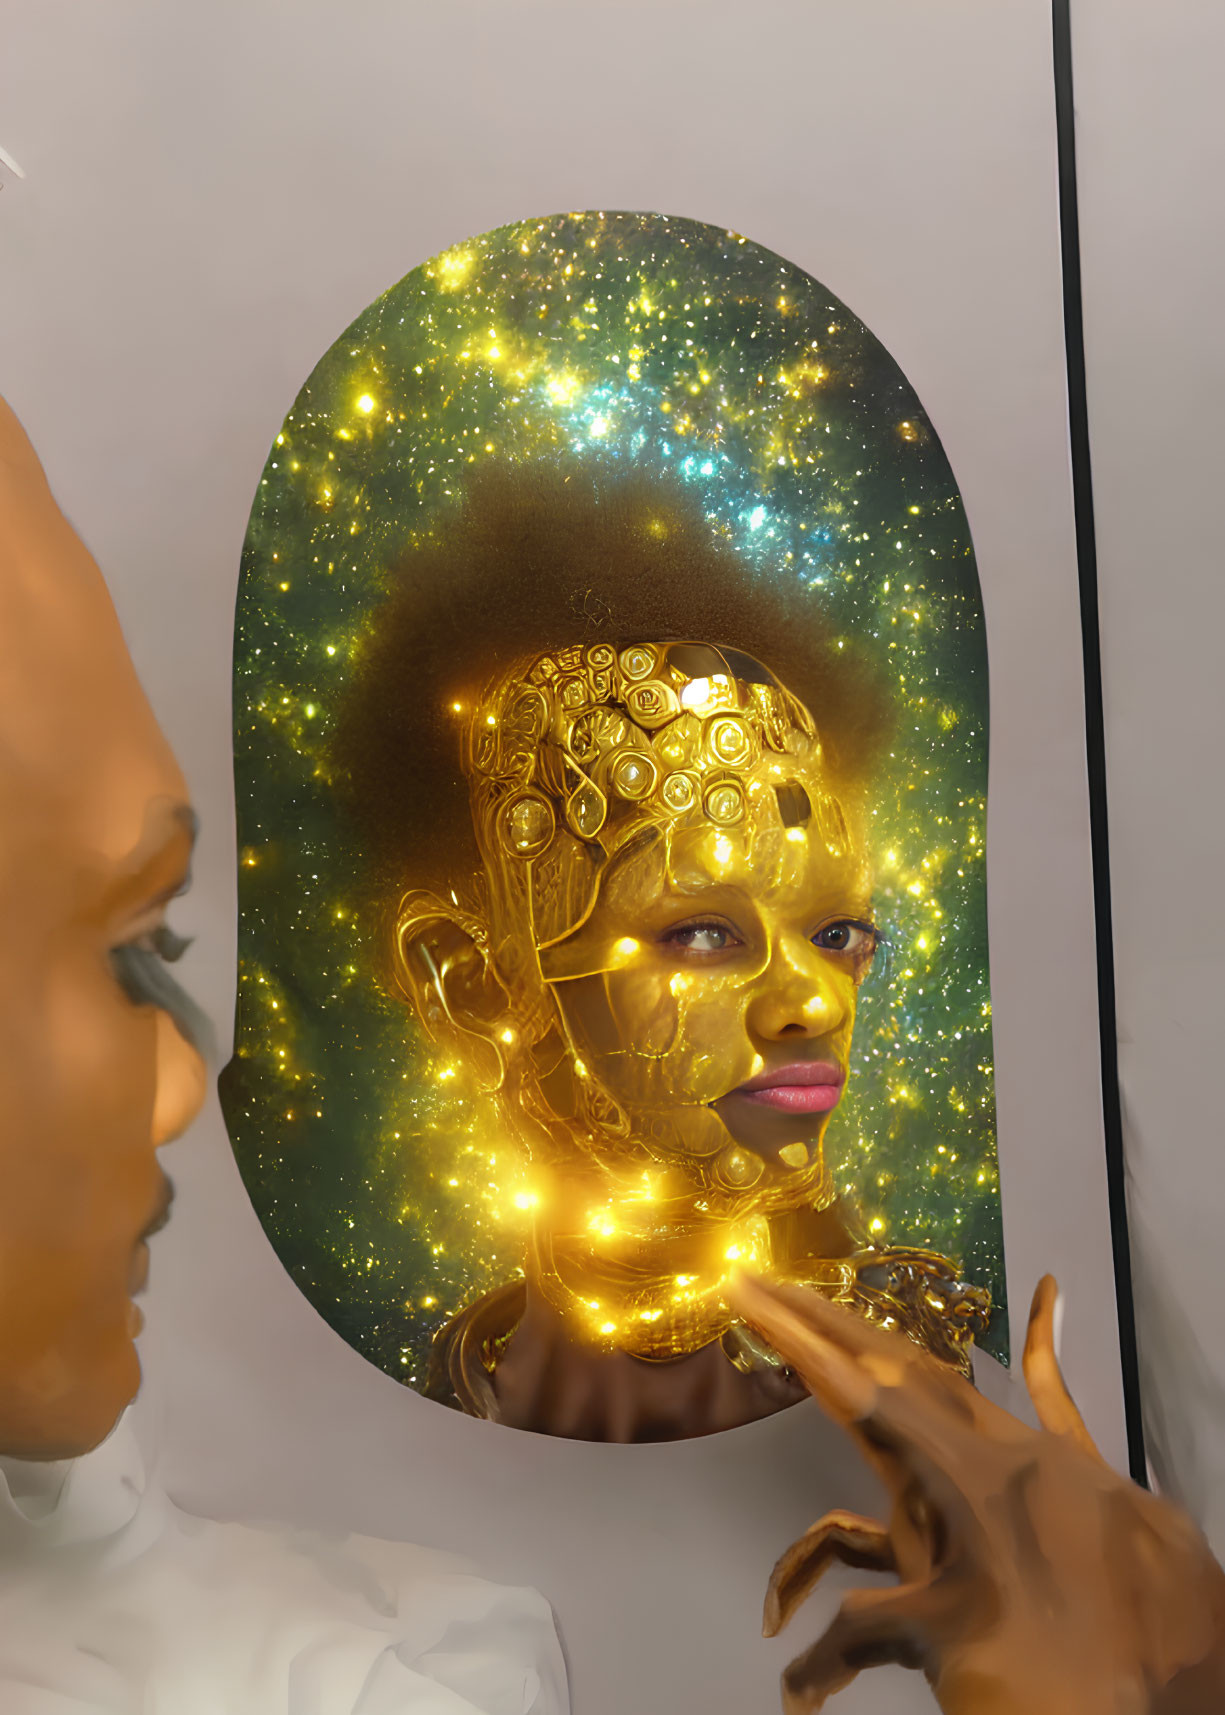 Surreal portrait of person with radiant golden aura and hand covering face